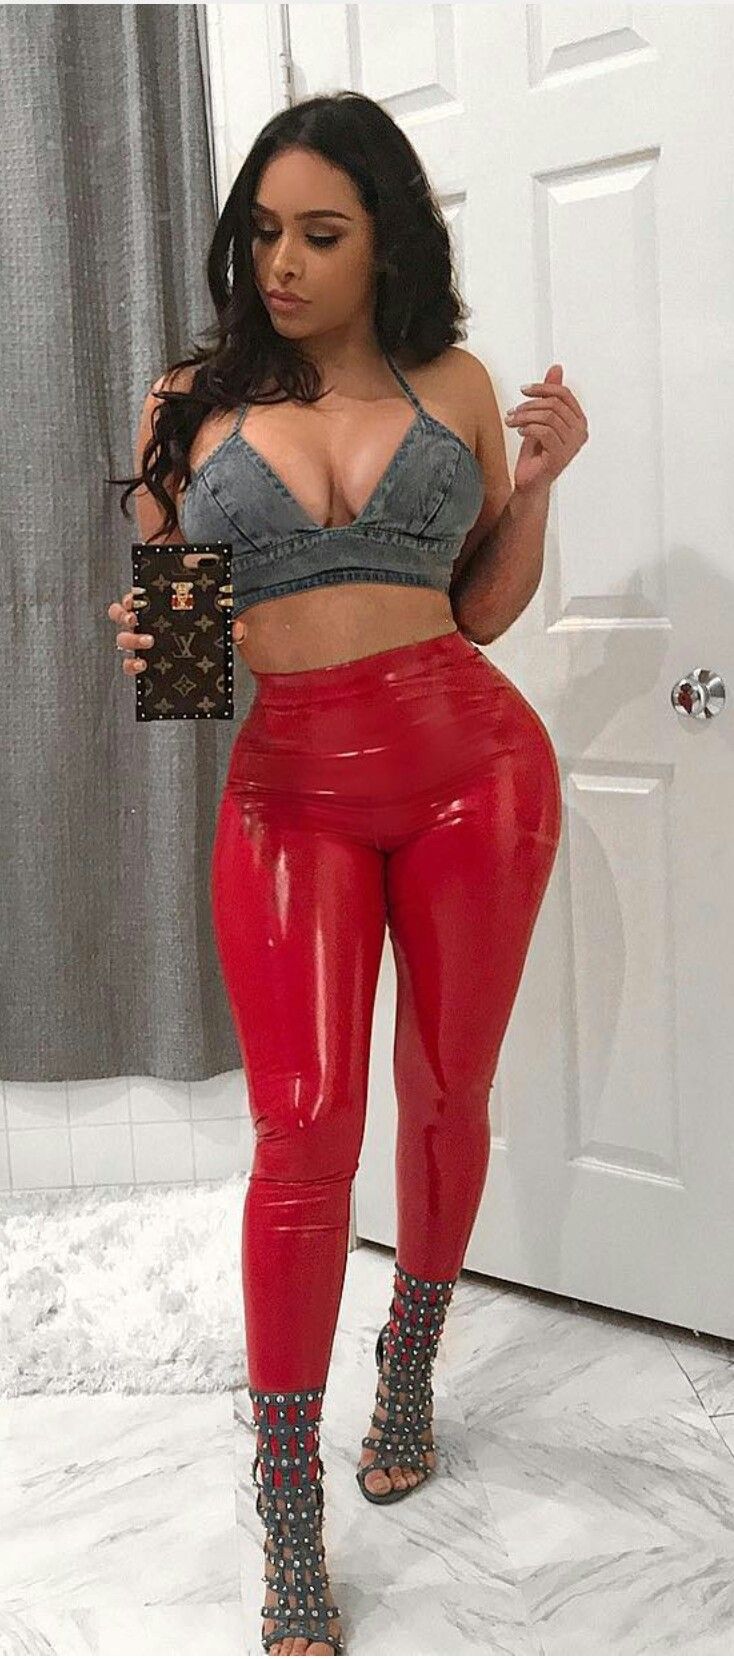 destiny rivas recommends hot chicks in shiny pants pic